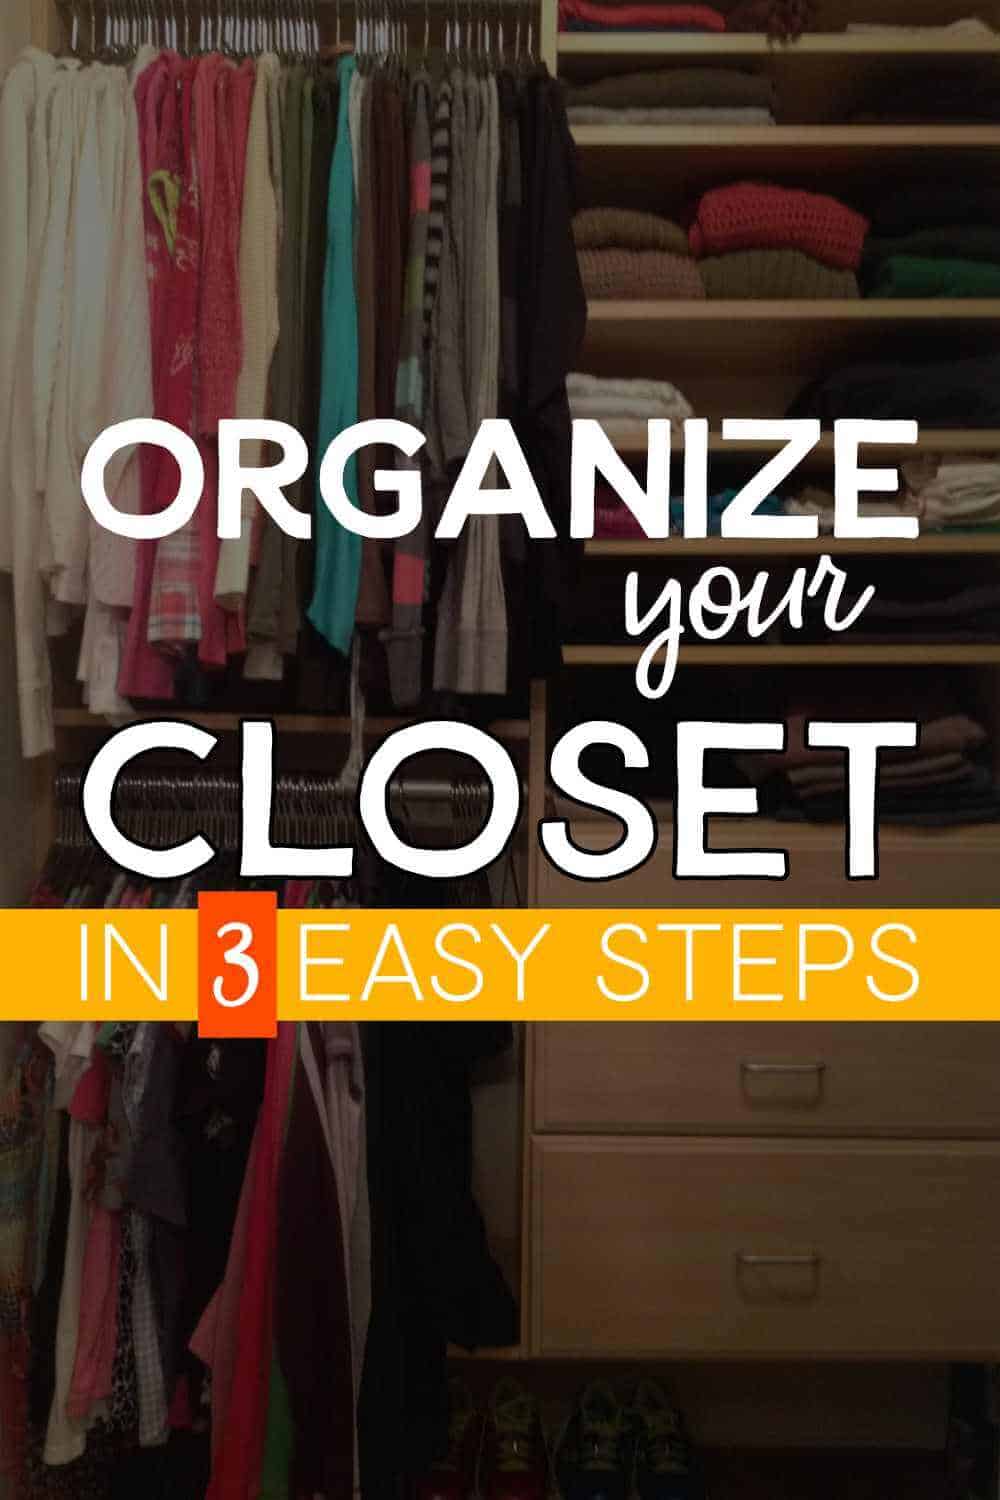 https://sunshineandrainydays.com/wp-content/uploads/2014/02/Organize-Your-Closet-In-3-Easy-Steps-P_1.jpg